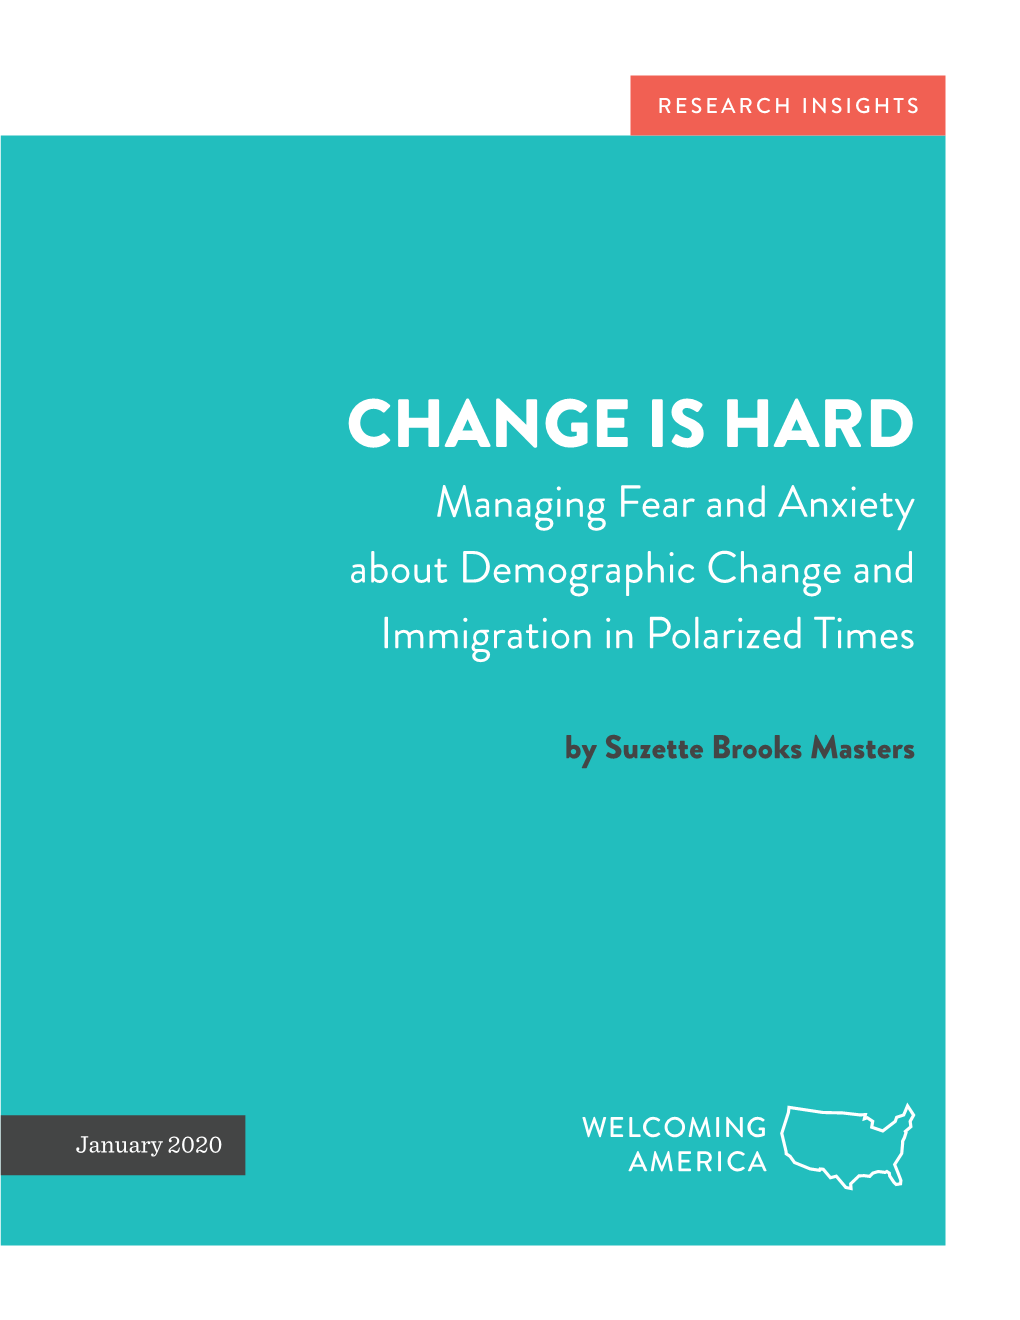 CHANGE IS HARD Managing Fear and Anxiety About Demographic Change and Immigration in Polarized Times